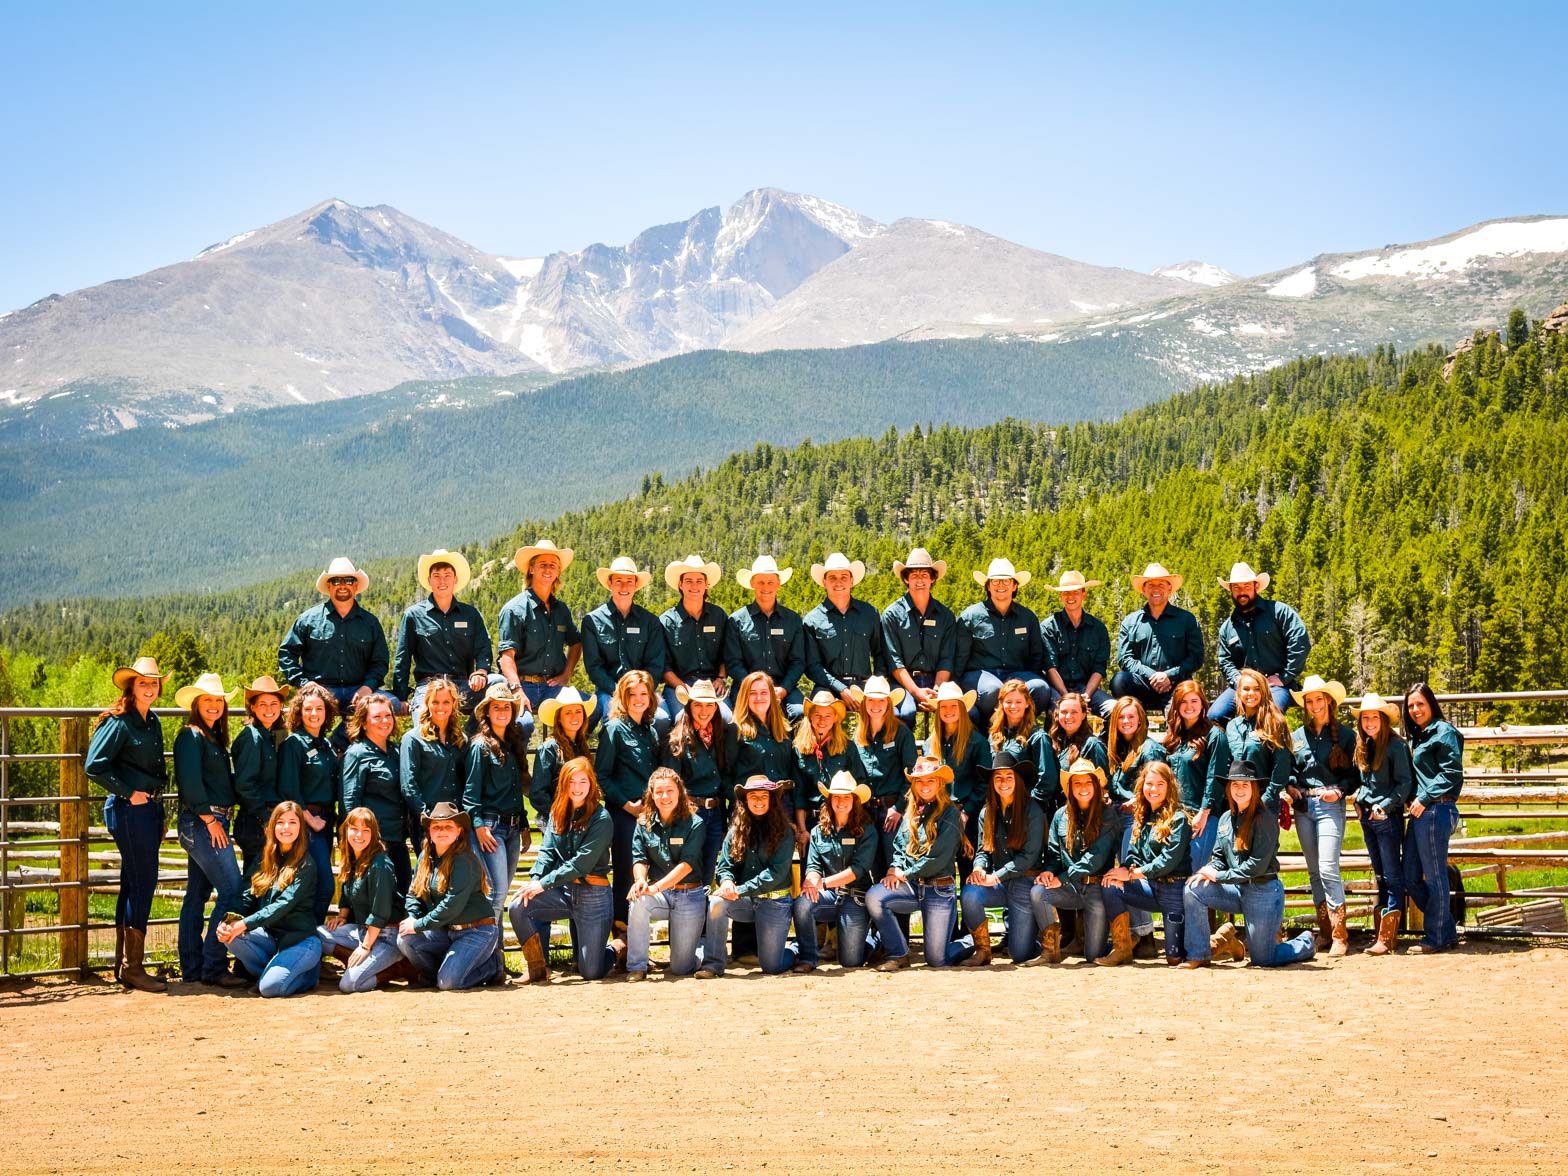 Group photo of young camp staff members in front of a beautiful mountainous landscape.